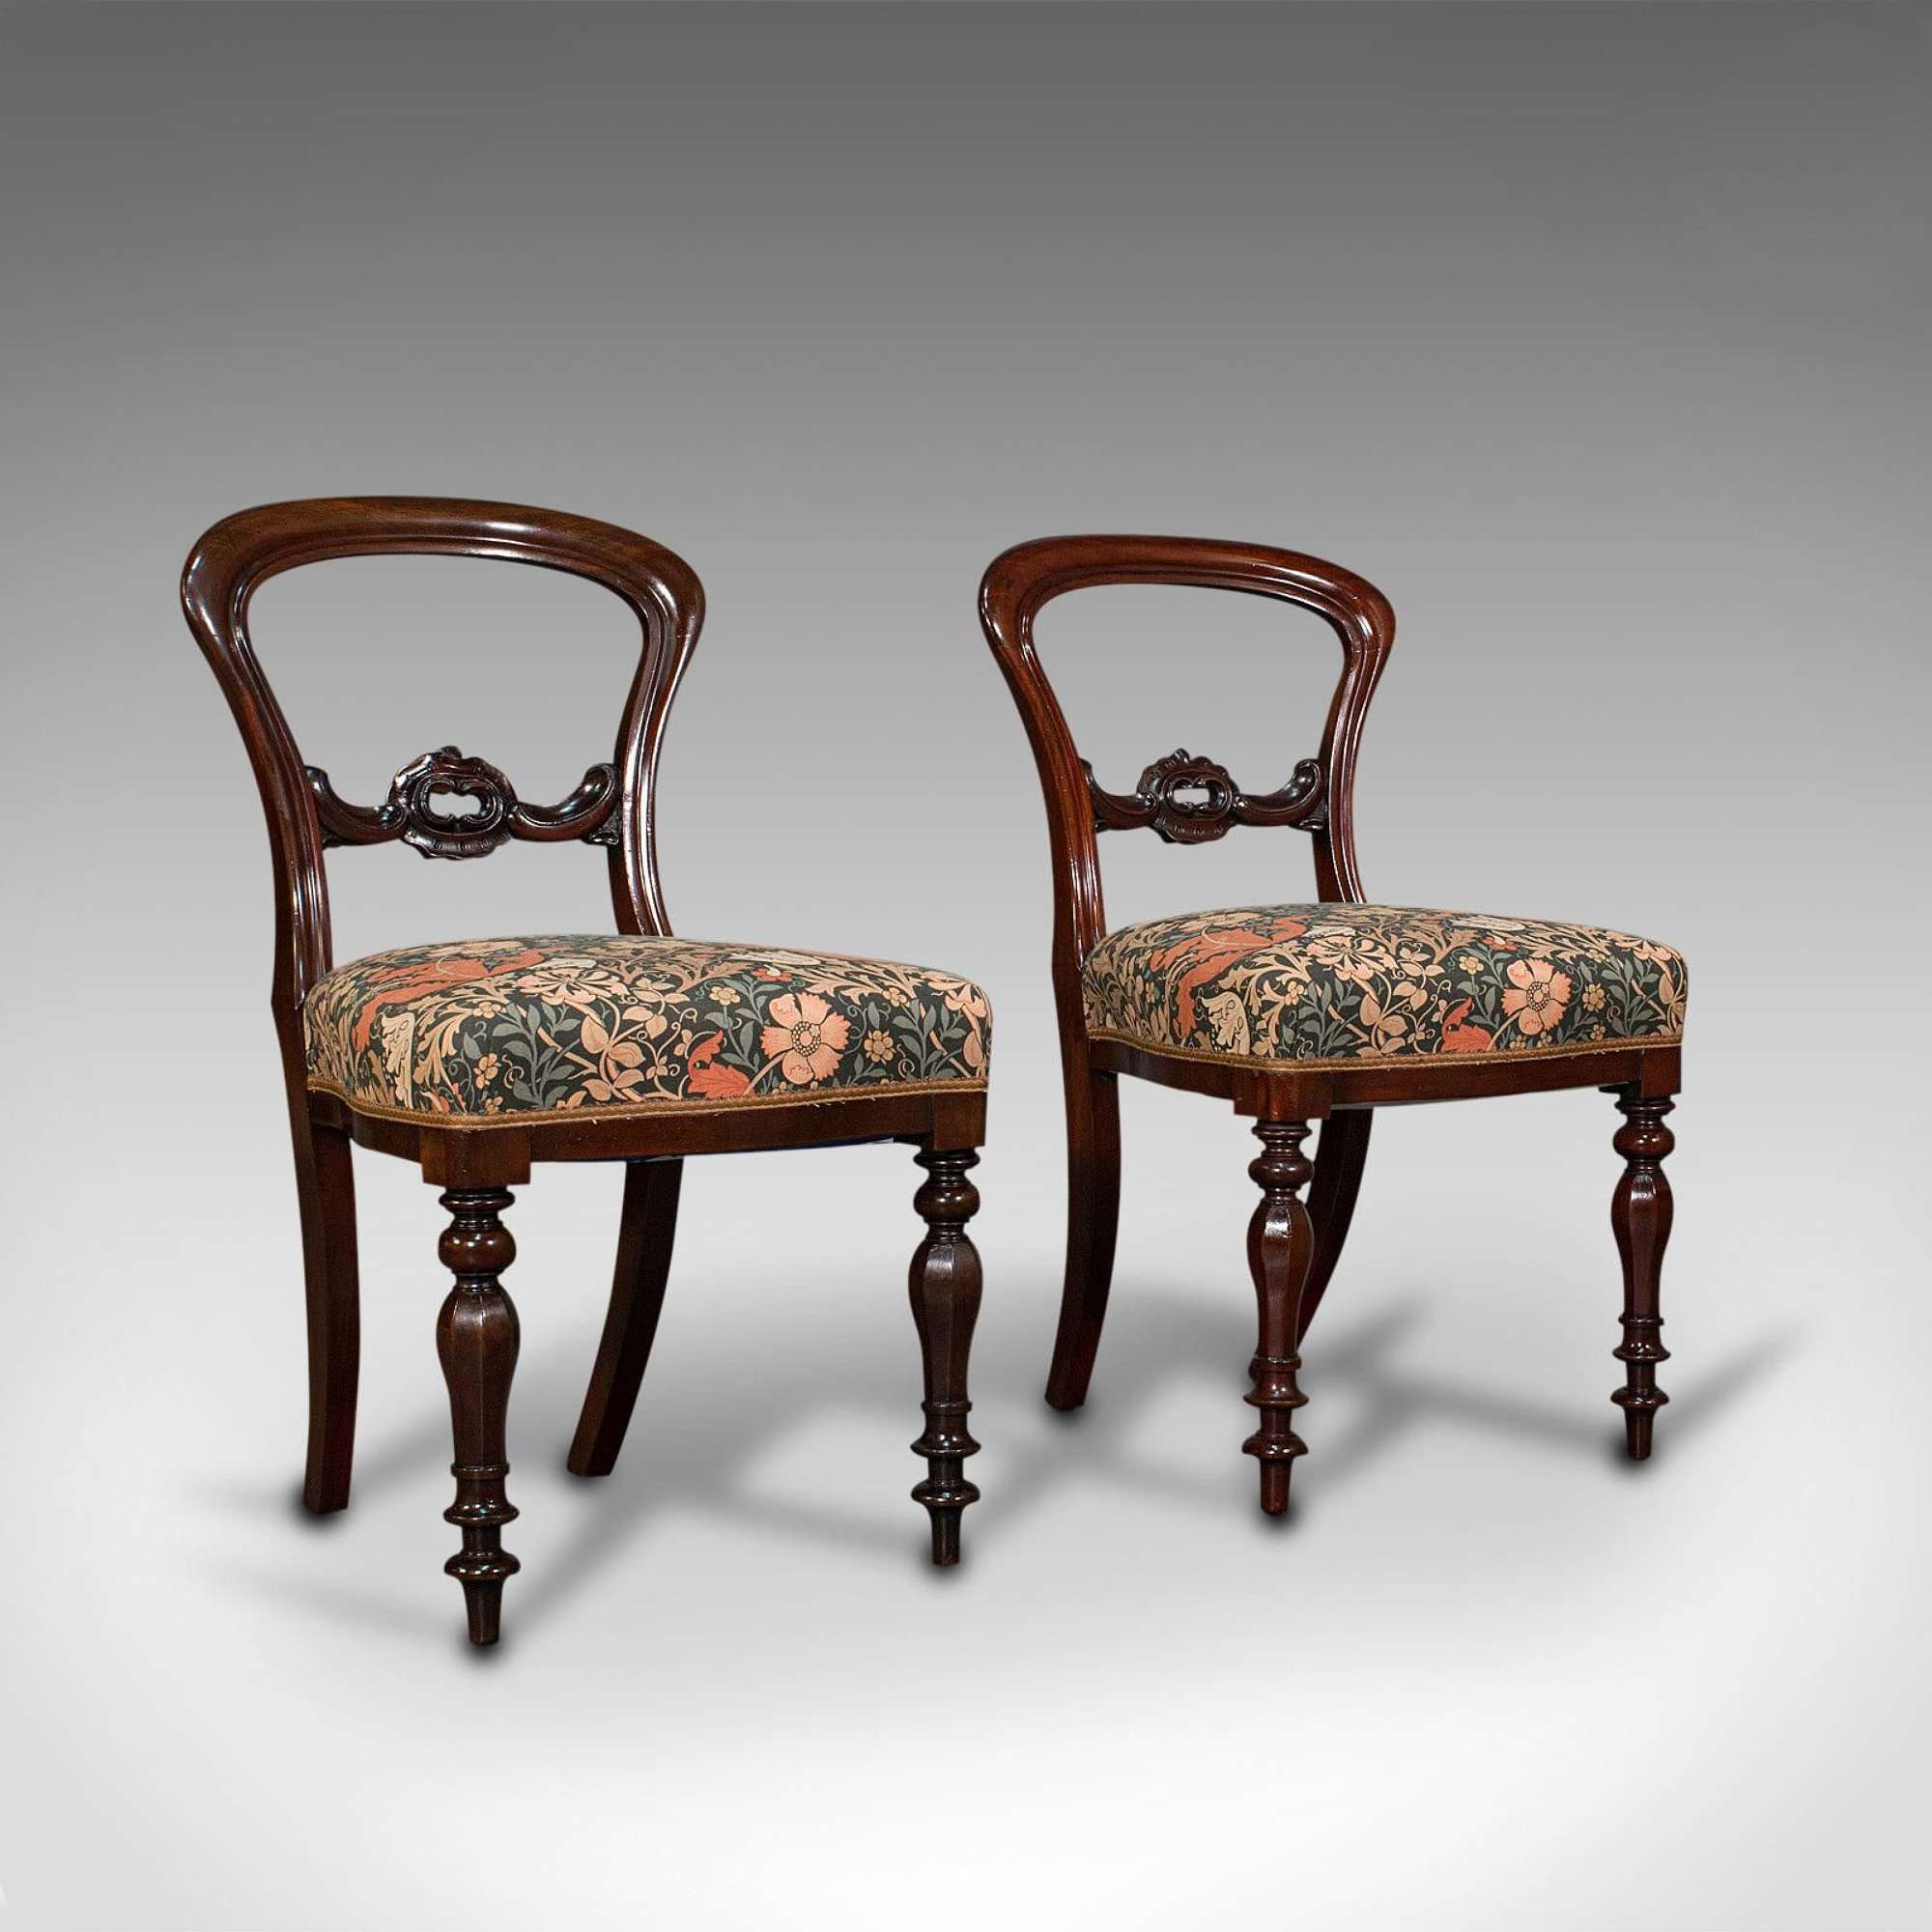 Pair Of Antique Buckle Back Chairs, English, Walnut, Dining, Side, Victorian